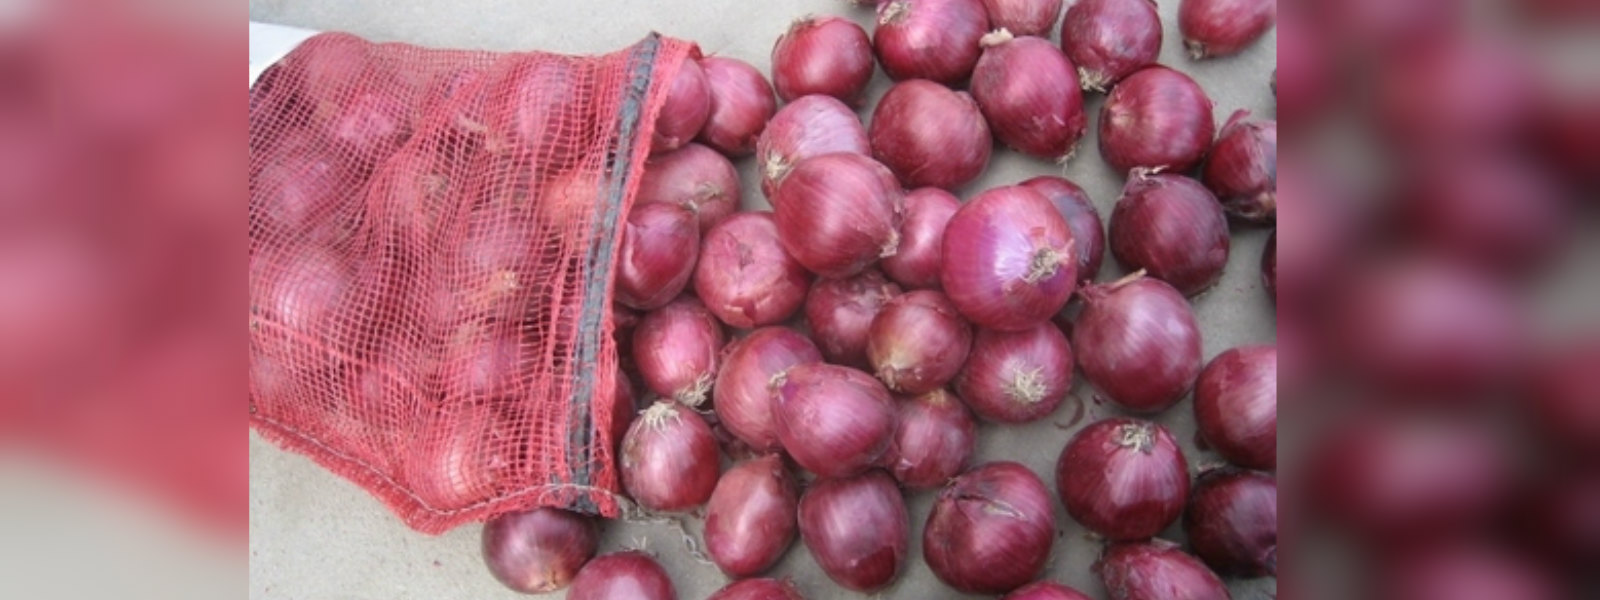 Government to import big onions from India